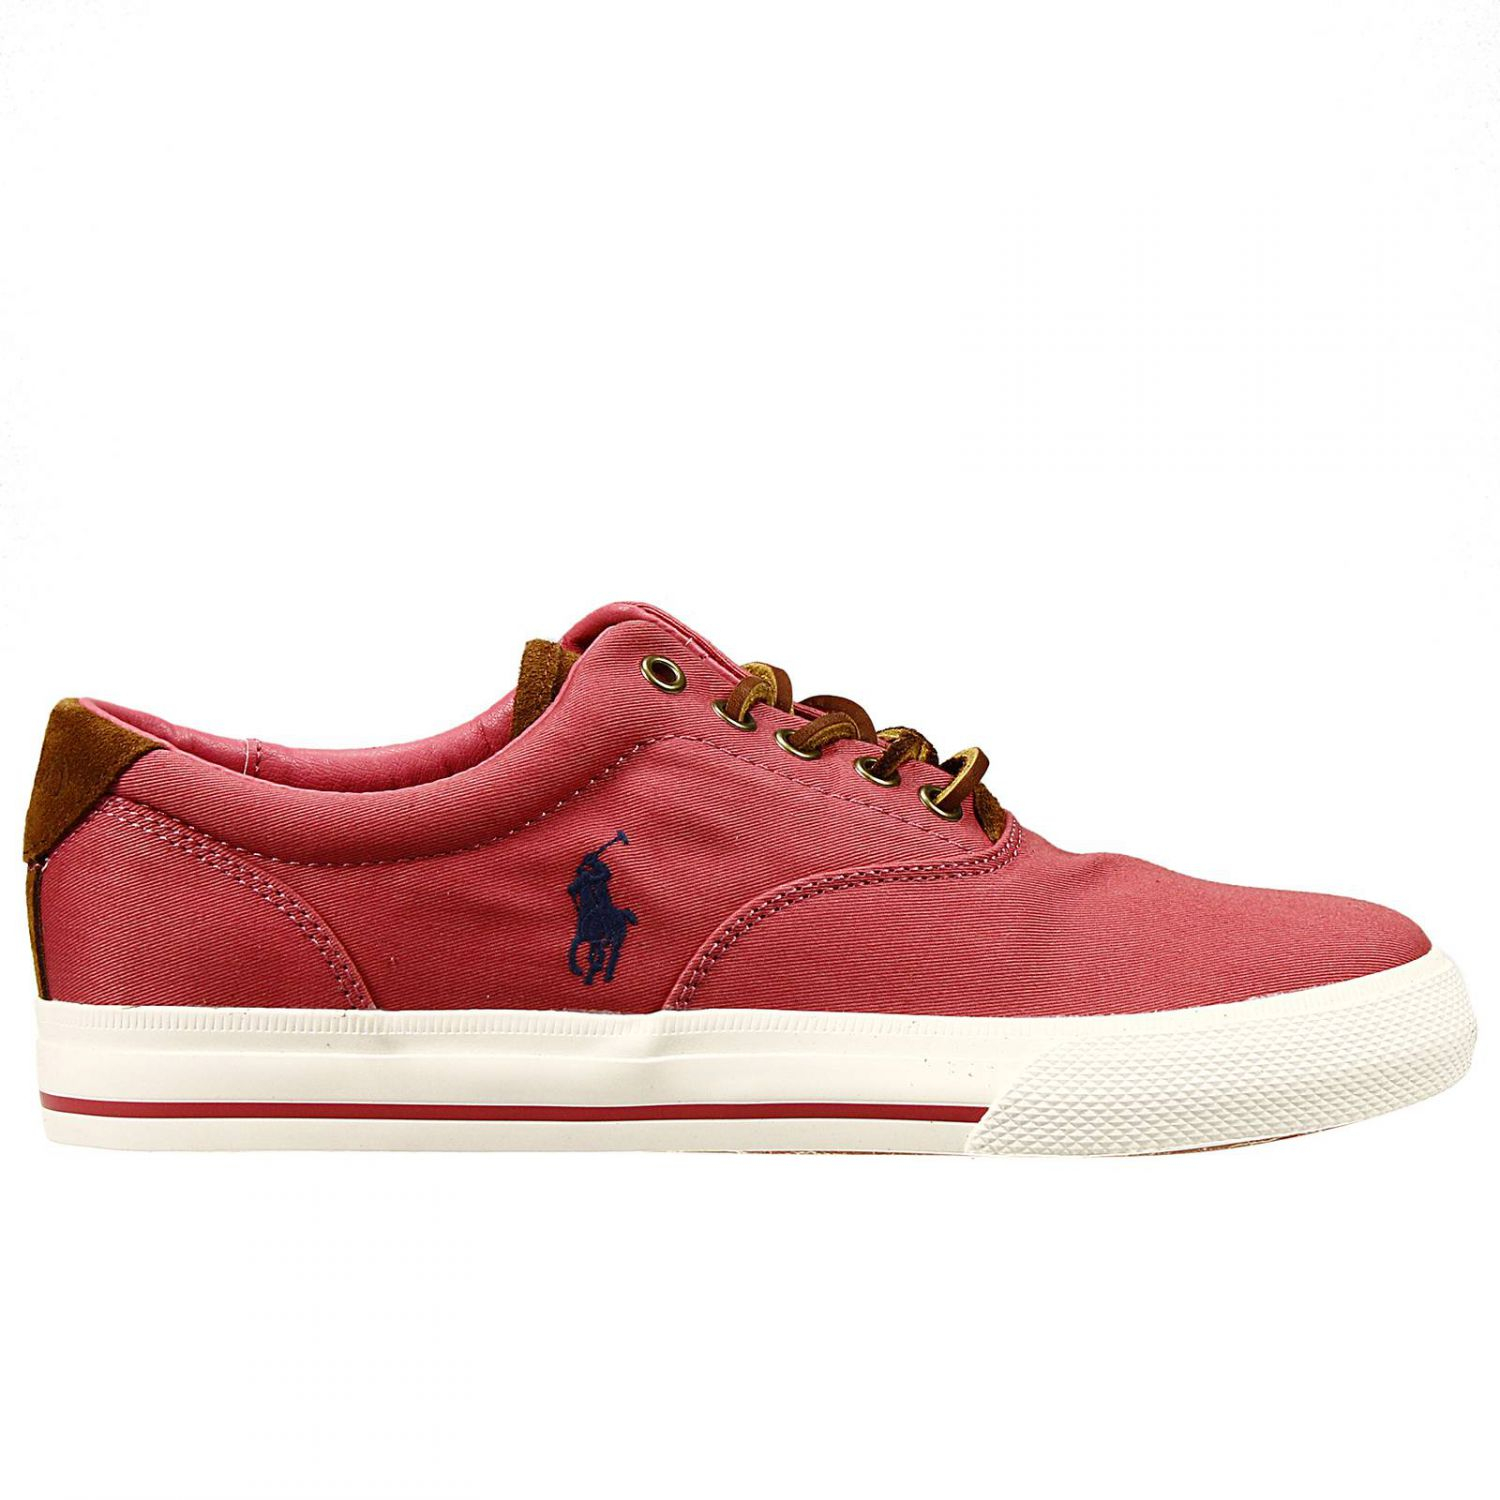 polo ralph lauren red shoes Off 64%